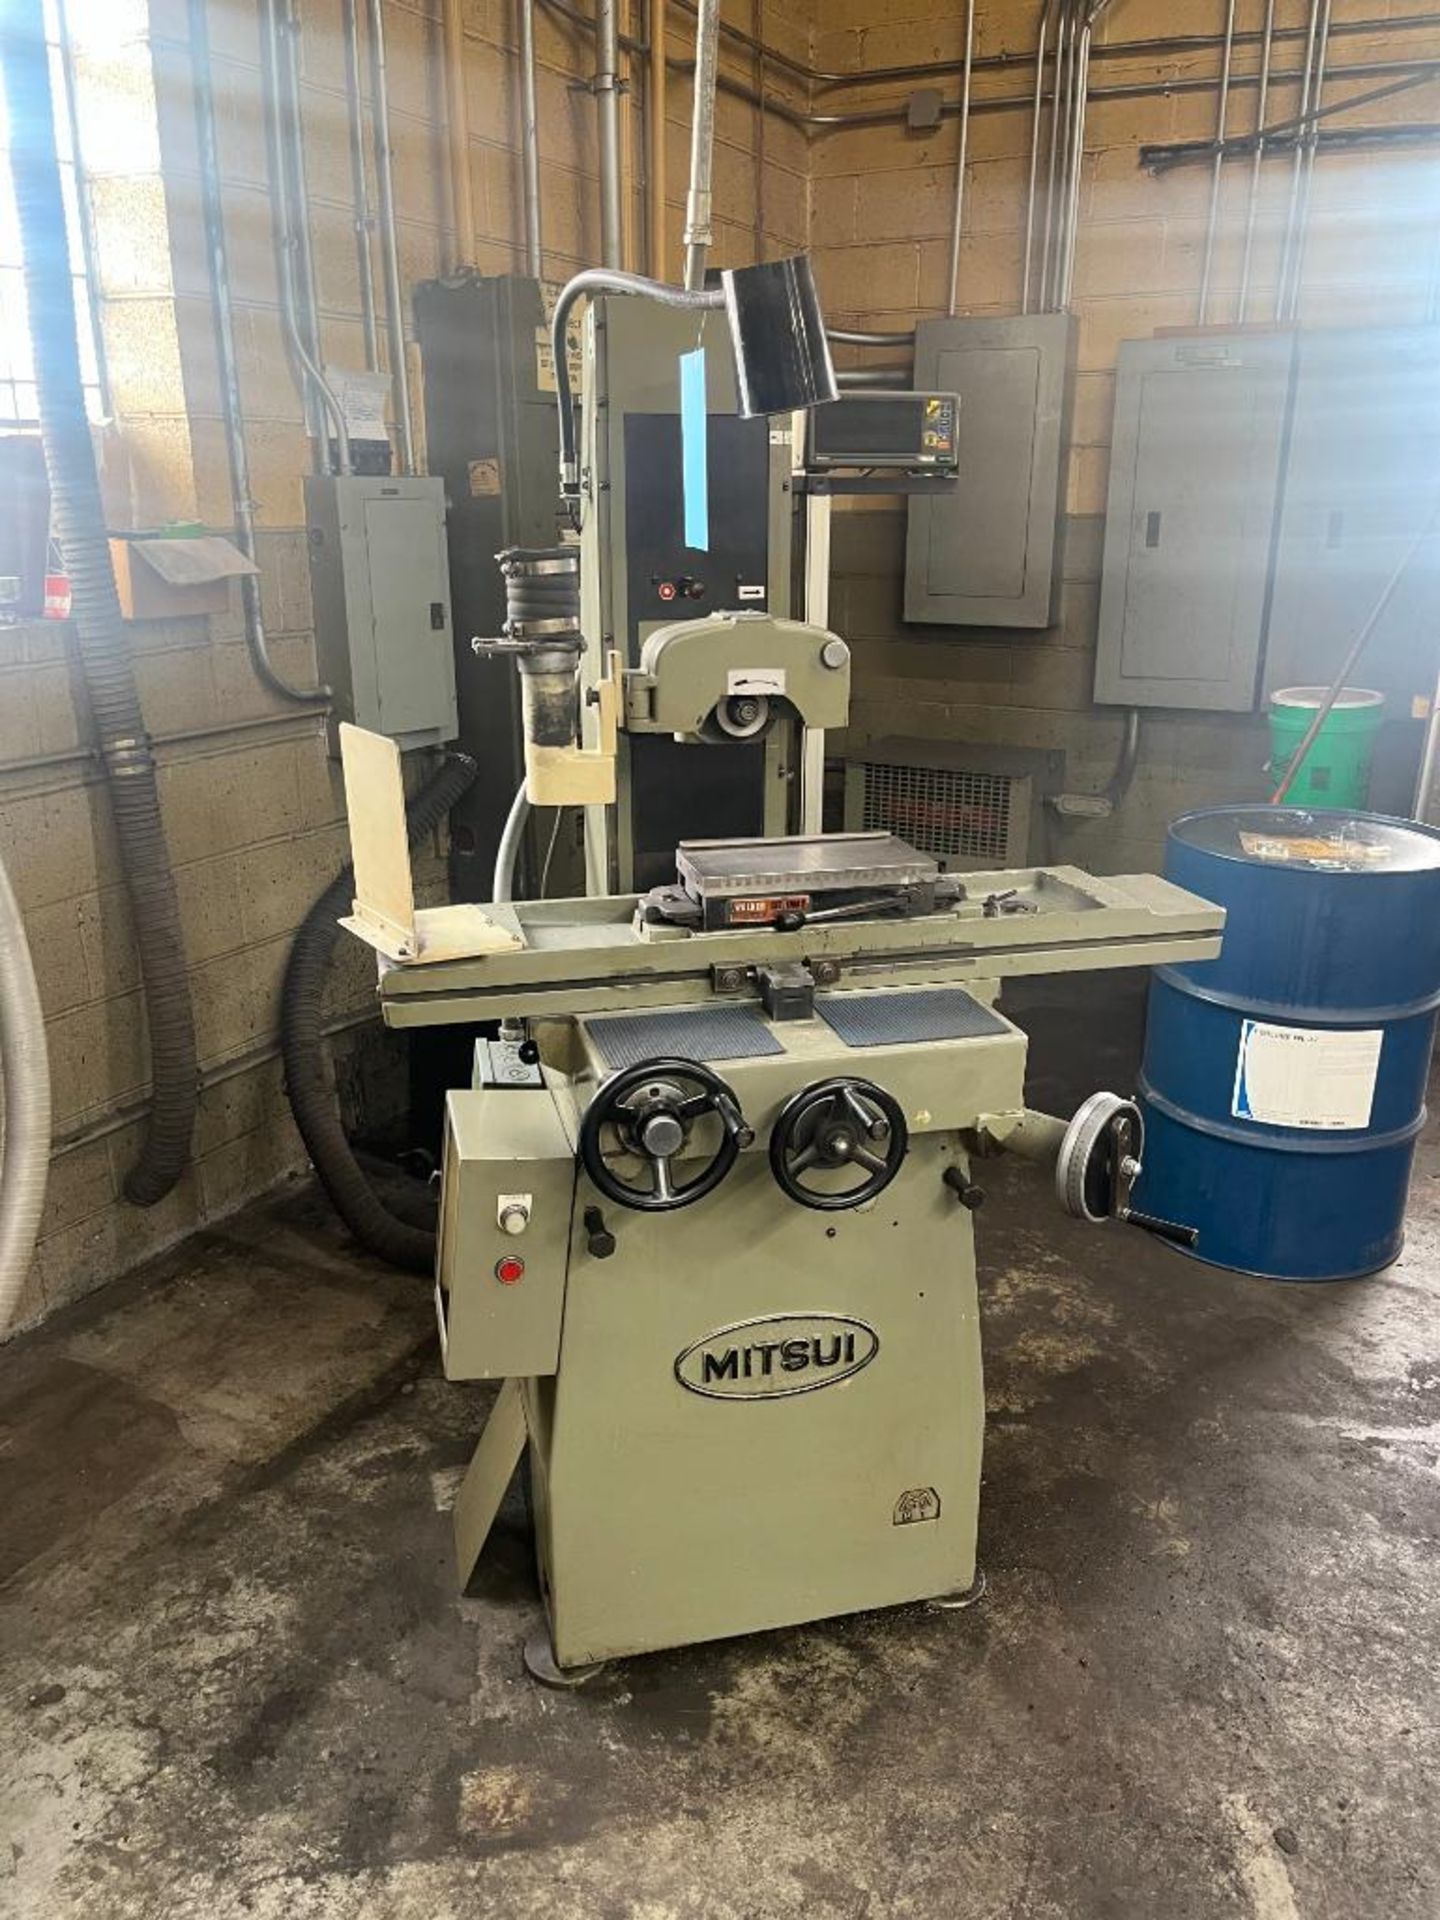 Mitsui 6" x 12" Hand Feed Surface Grinder Model 200MH, S/N 82023153 with DRO. With 6" x 12" Electrom